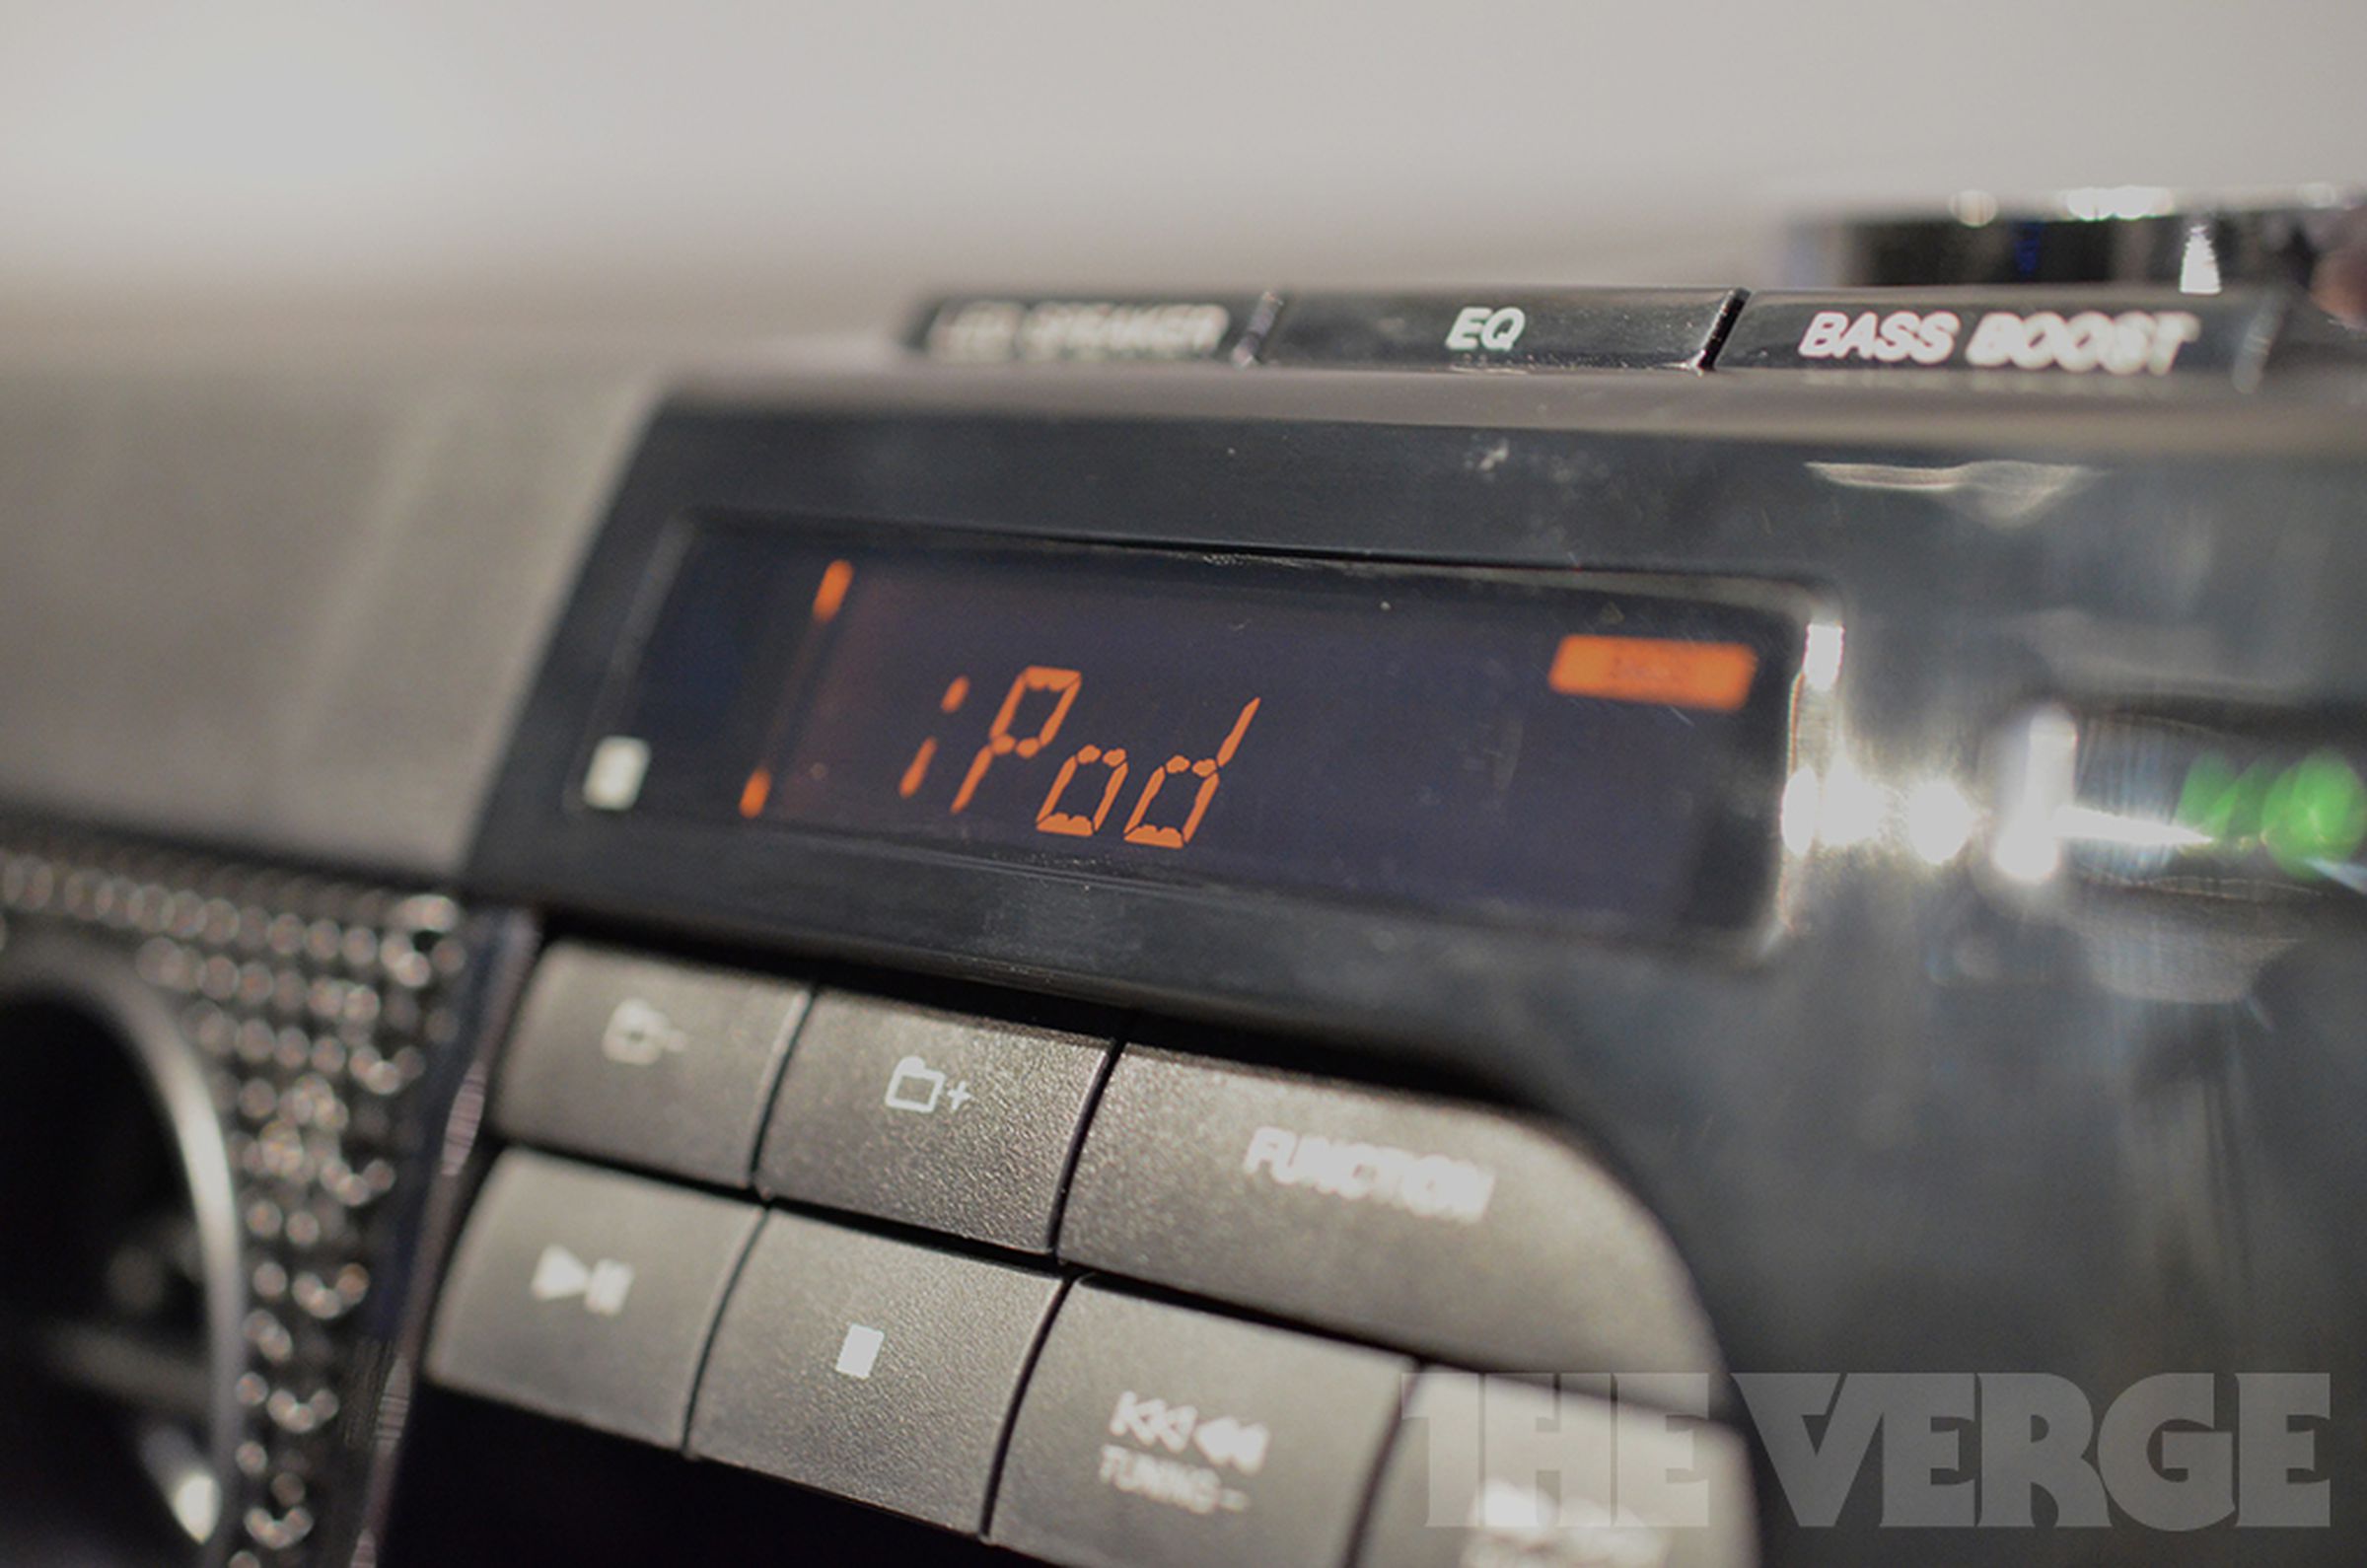 Sony RDH-GTK33iP iPod and iPhone dock hands-on photos